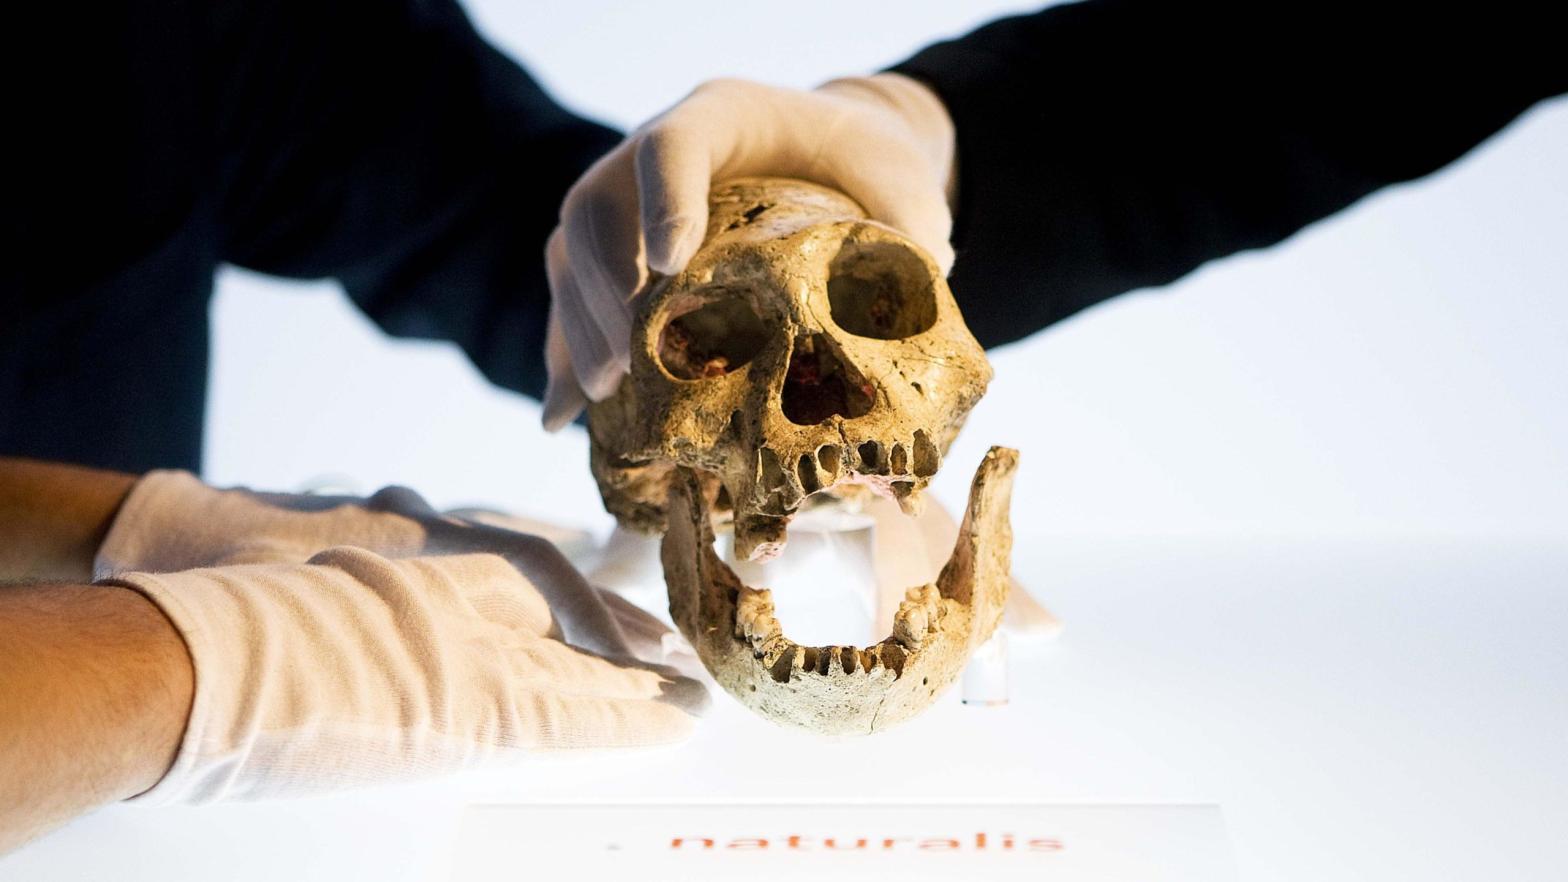 One of the Dmanisi skulls on exhibit in Leiden in 2009. (Photo: VALERIE KUYPERS/AFP via Getty Images, Getty Images)